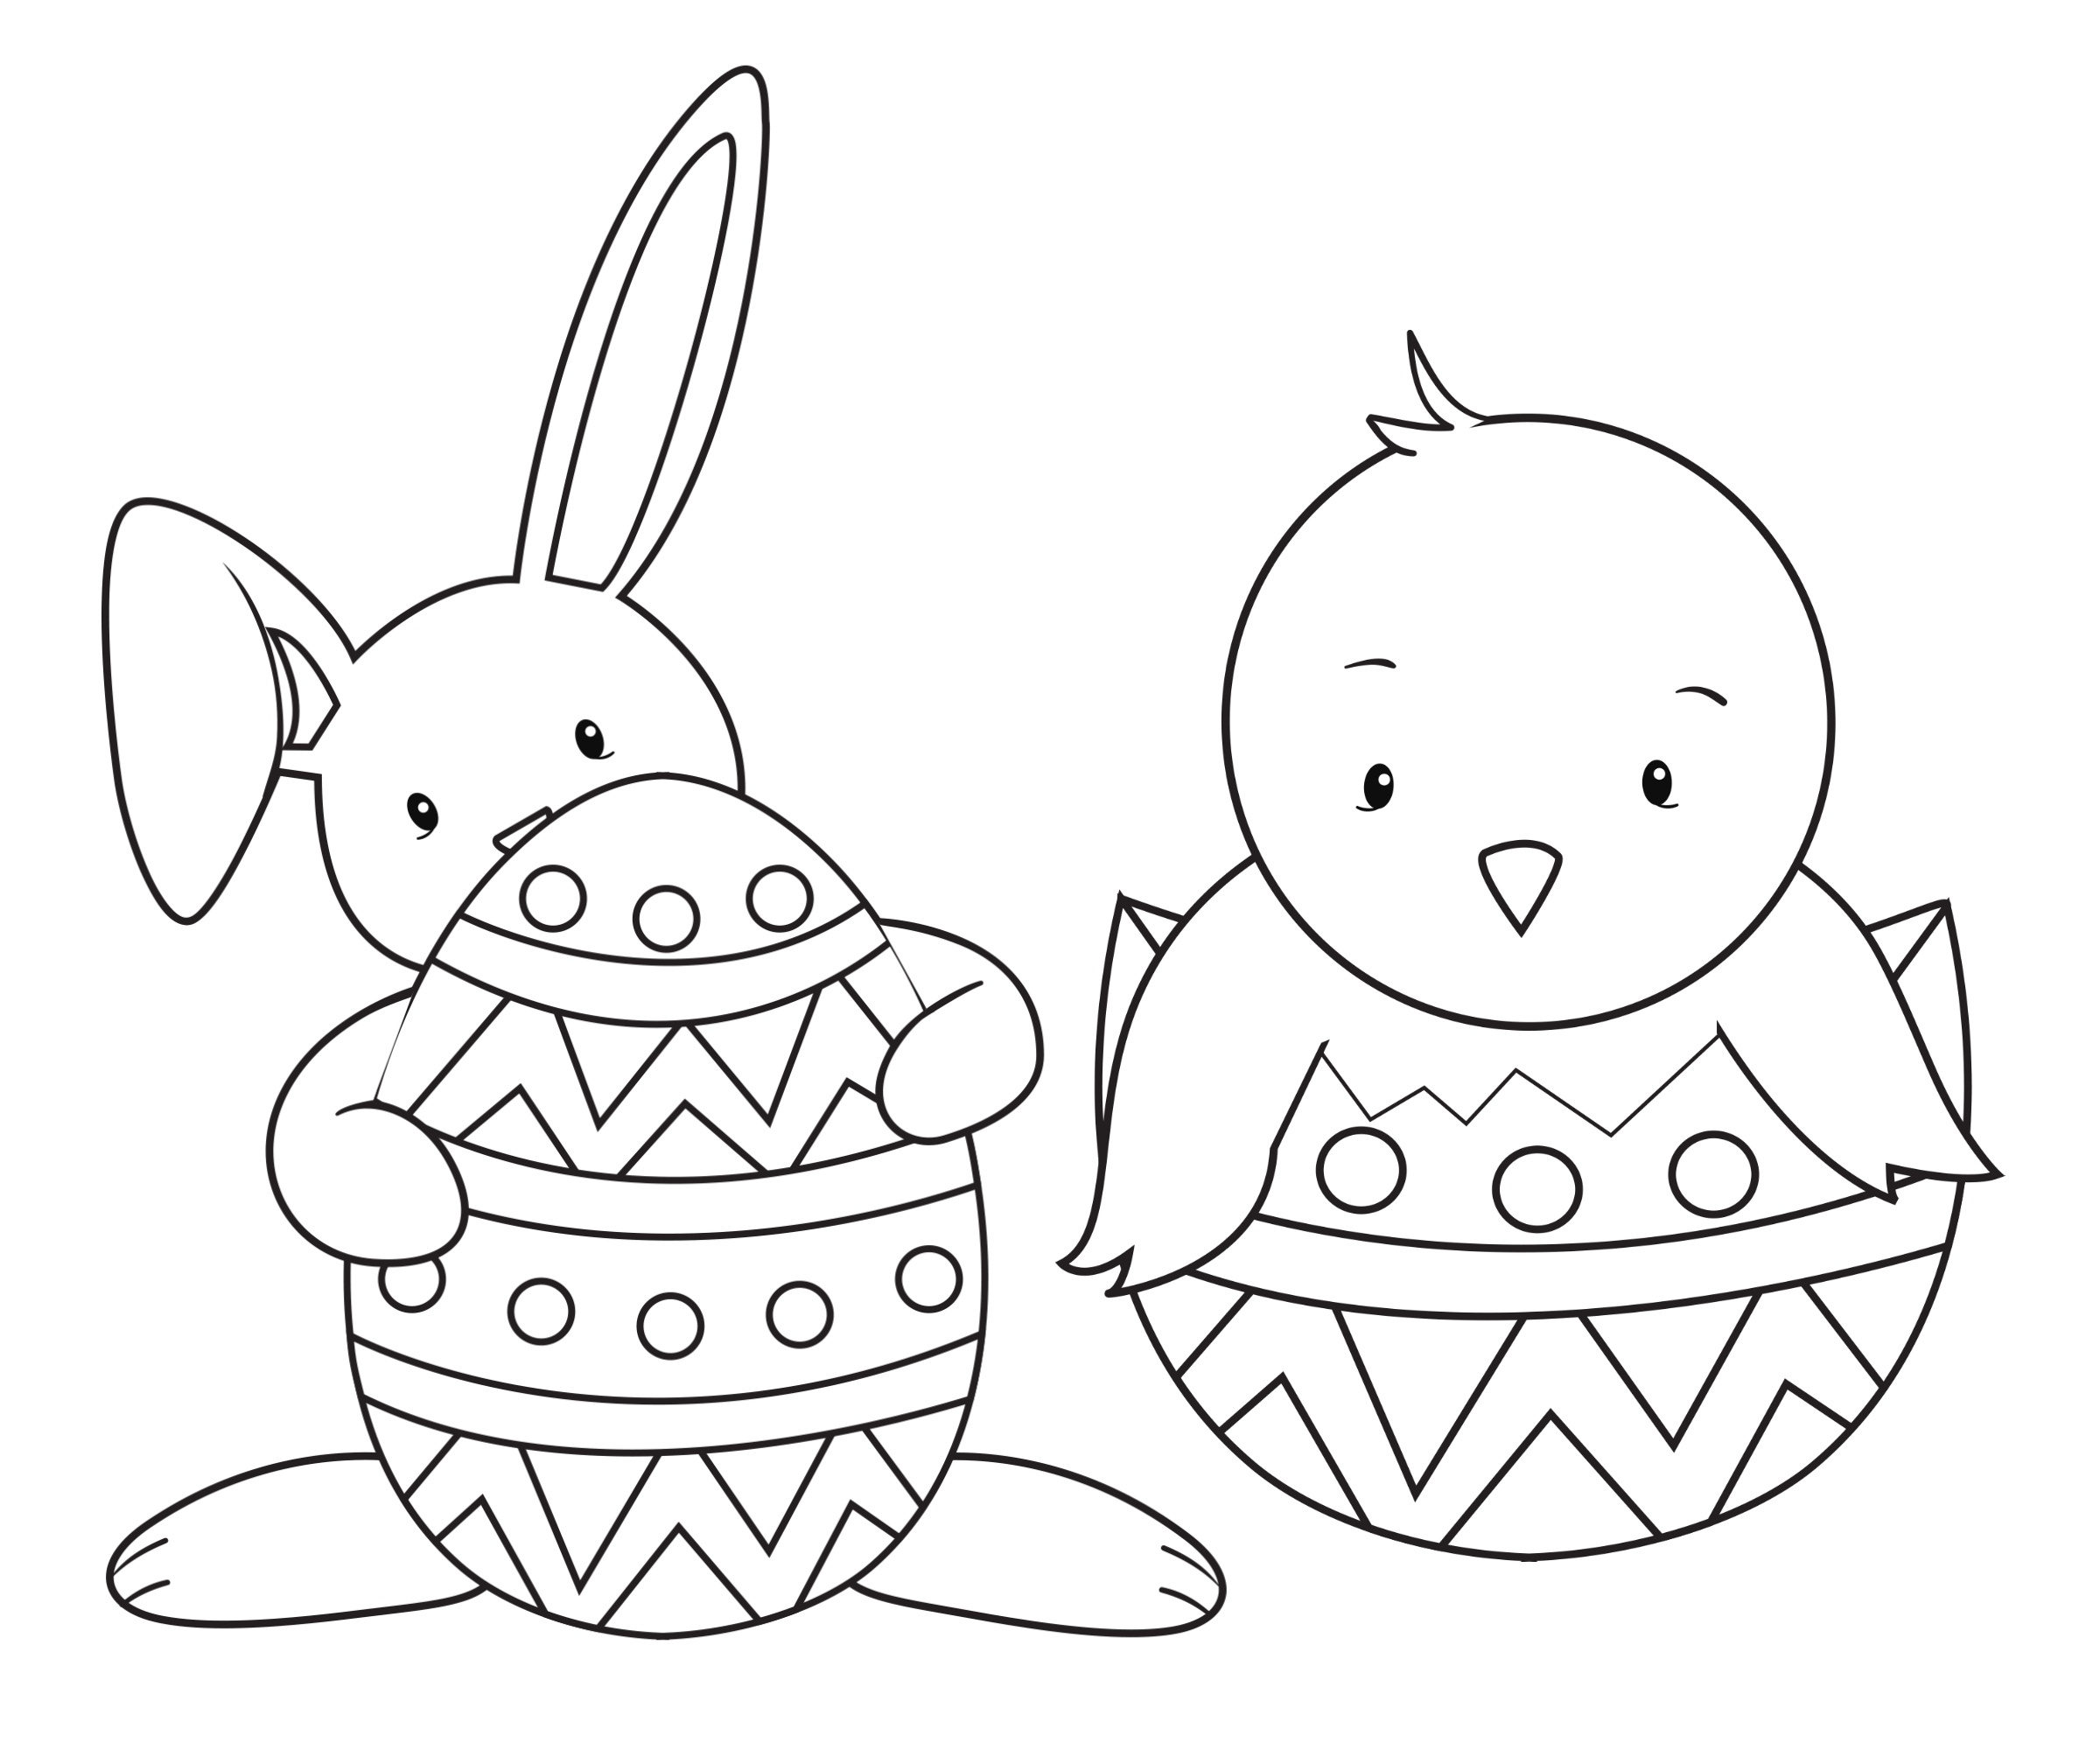 15 Easter Colouring In Pages - The Organised Housewife - Free Printable Easter Colouring Sheets